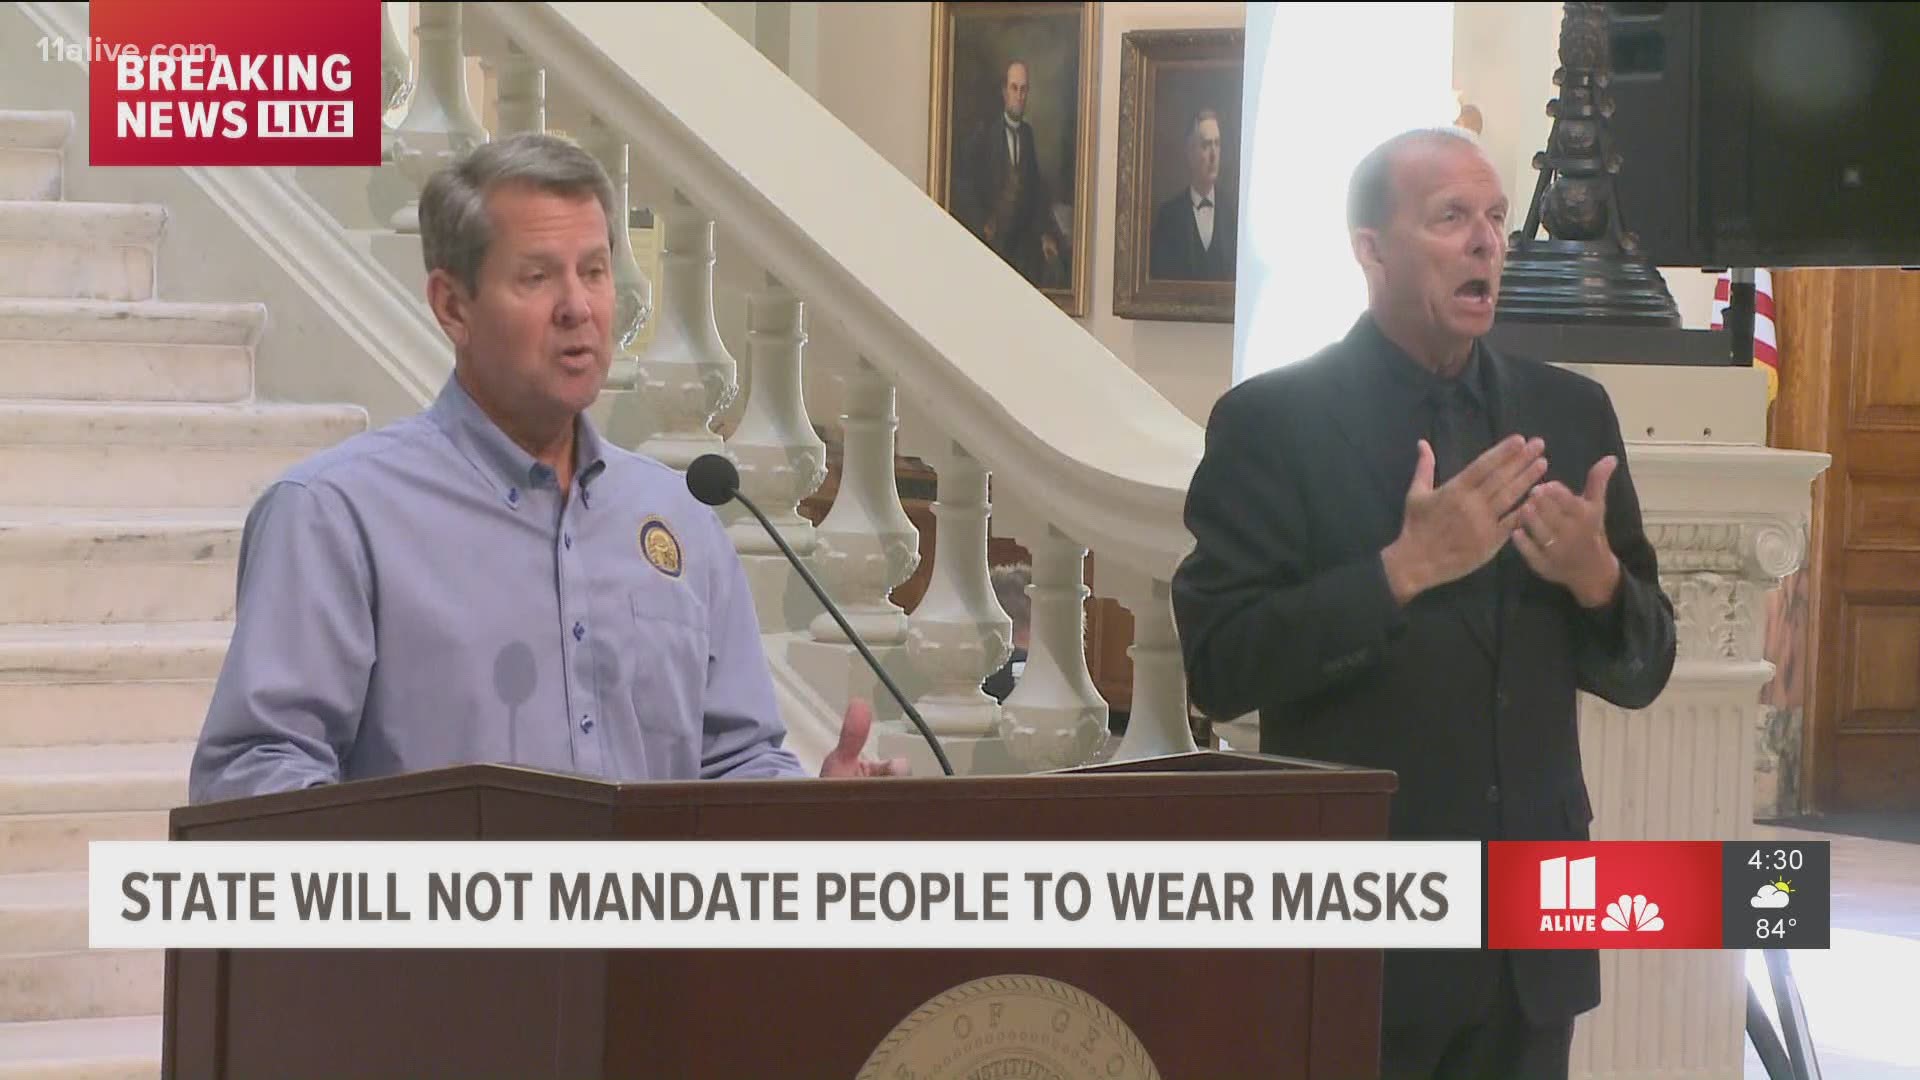 He said many people have been trying to comply with the guidelines.